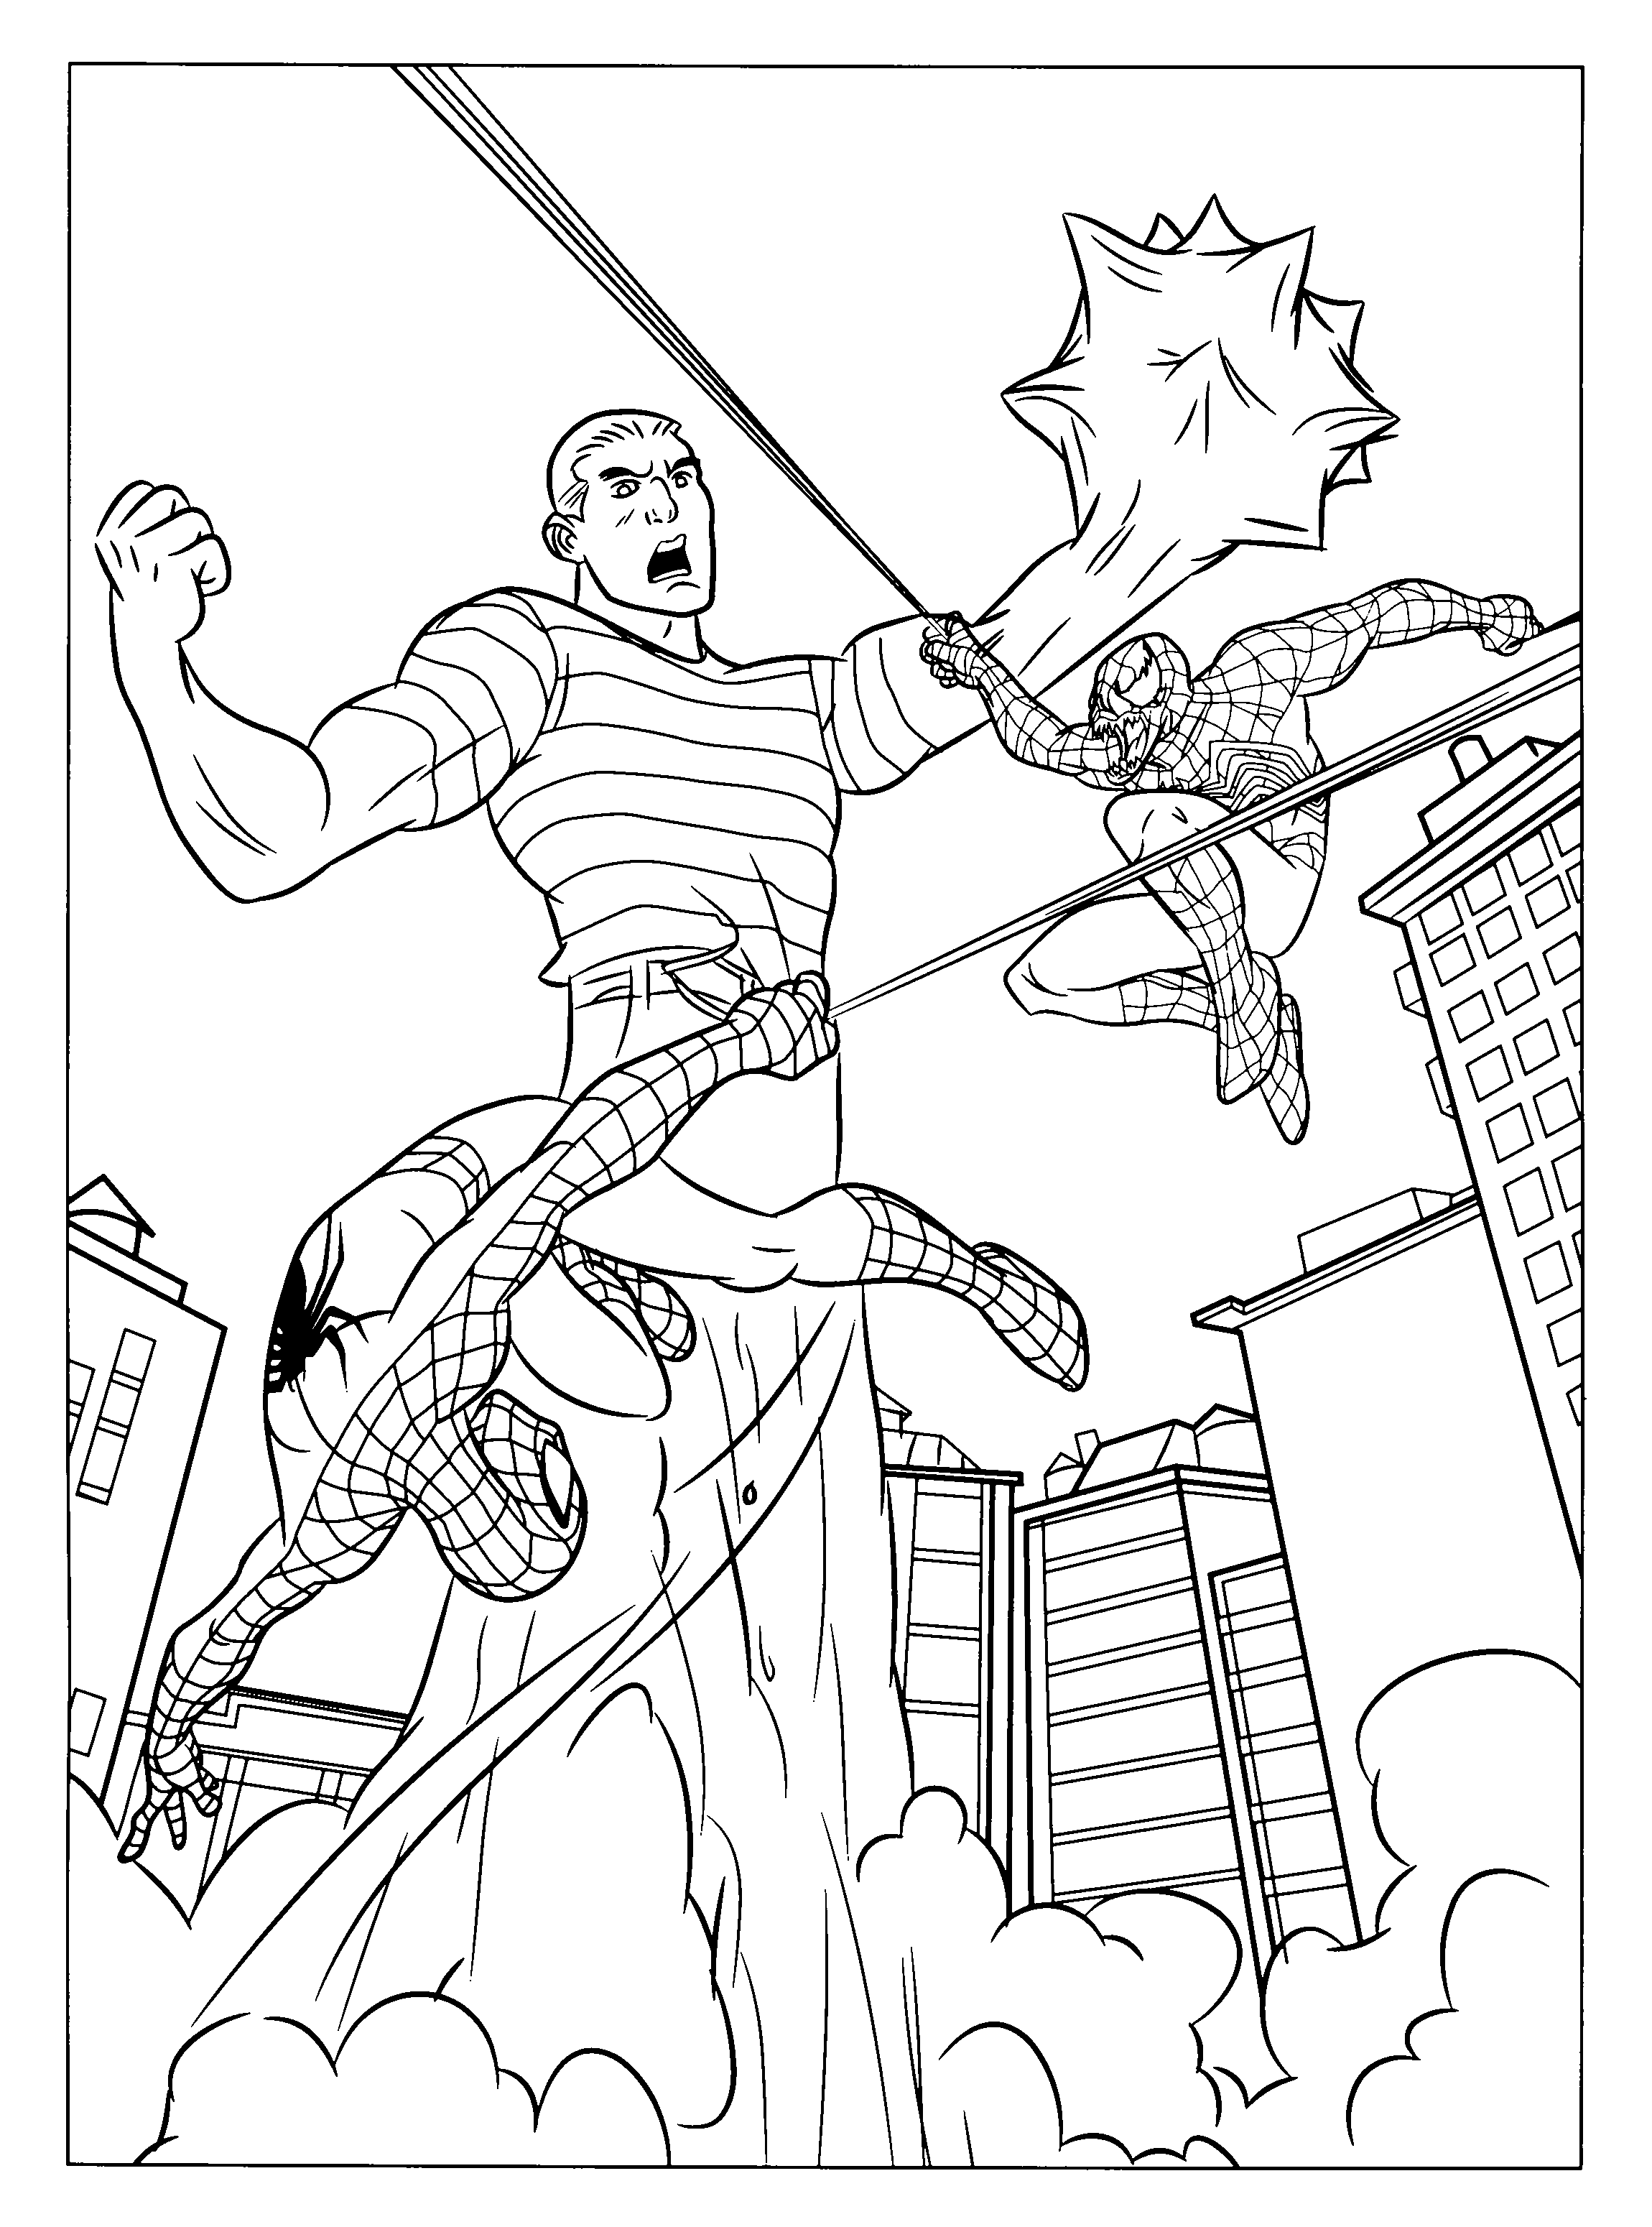 Spiderman Coloring pages | Coloring page | FREE Coloring pages for kids | #1